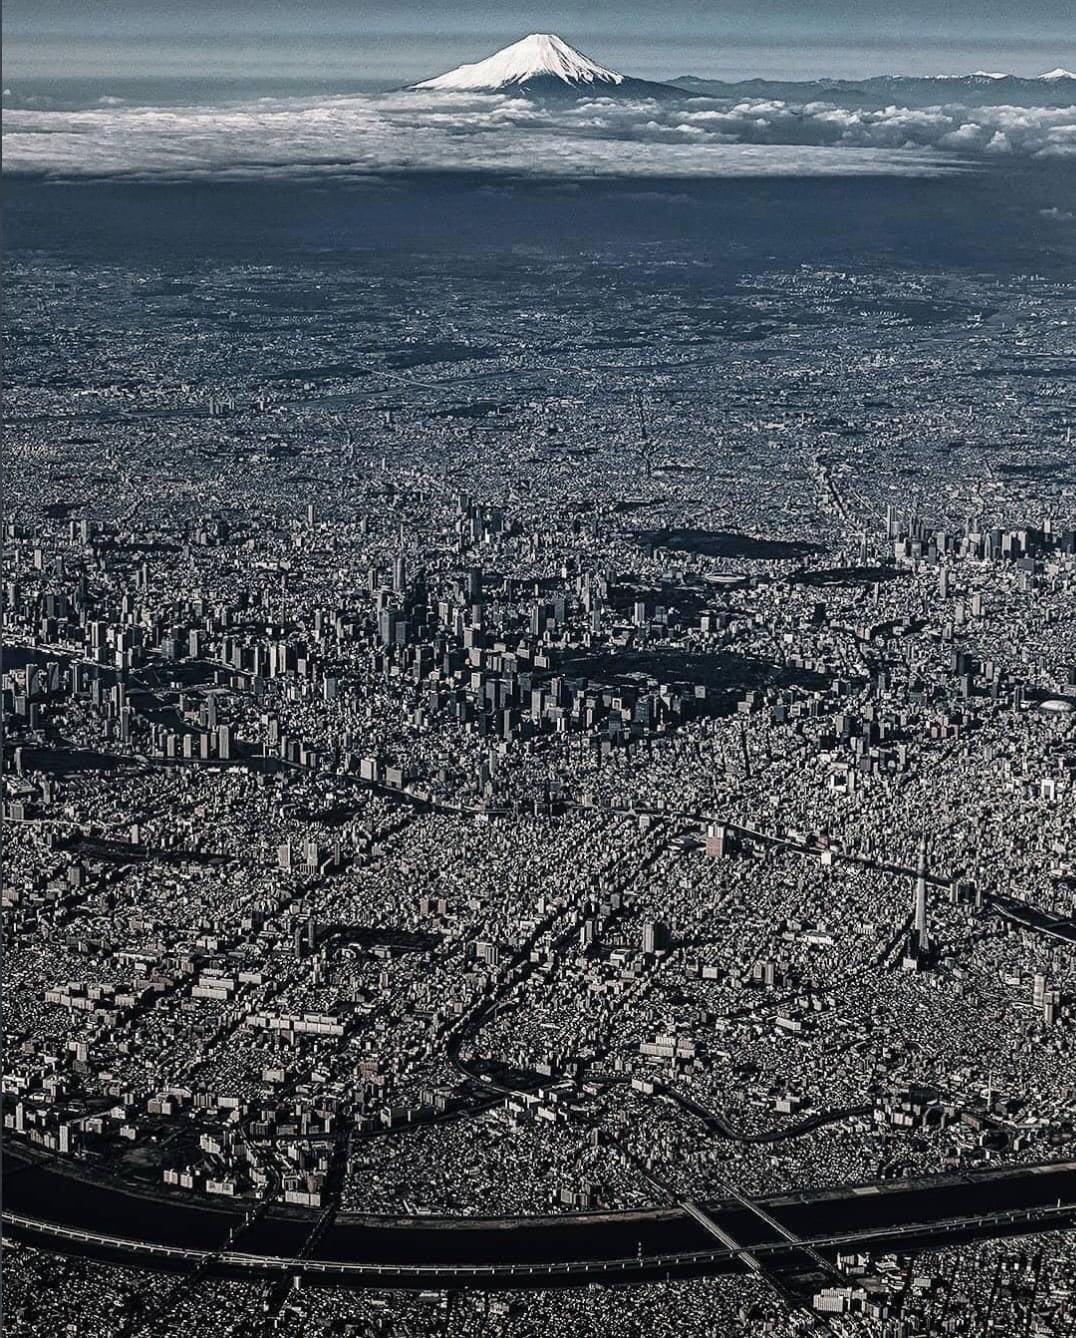 There’s cities, there’s metropolises, and then there’s Tokyo.